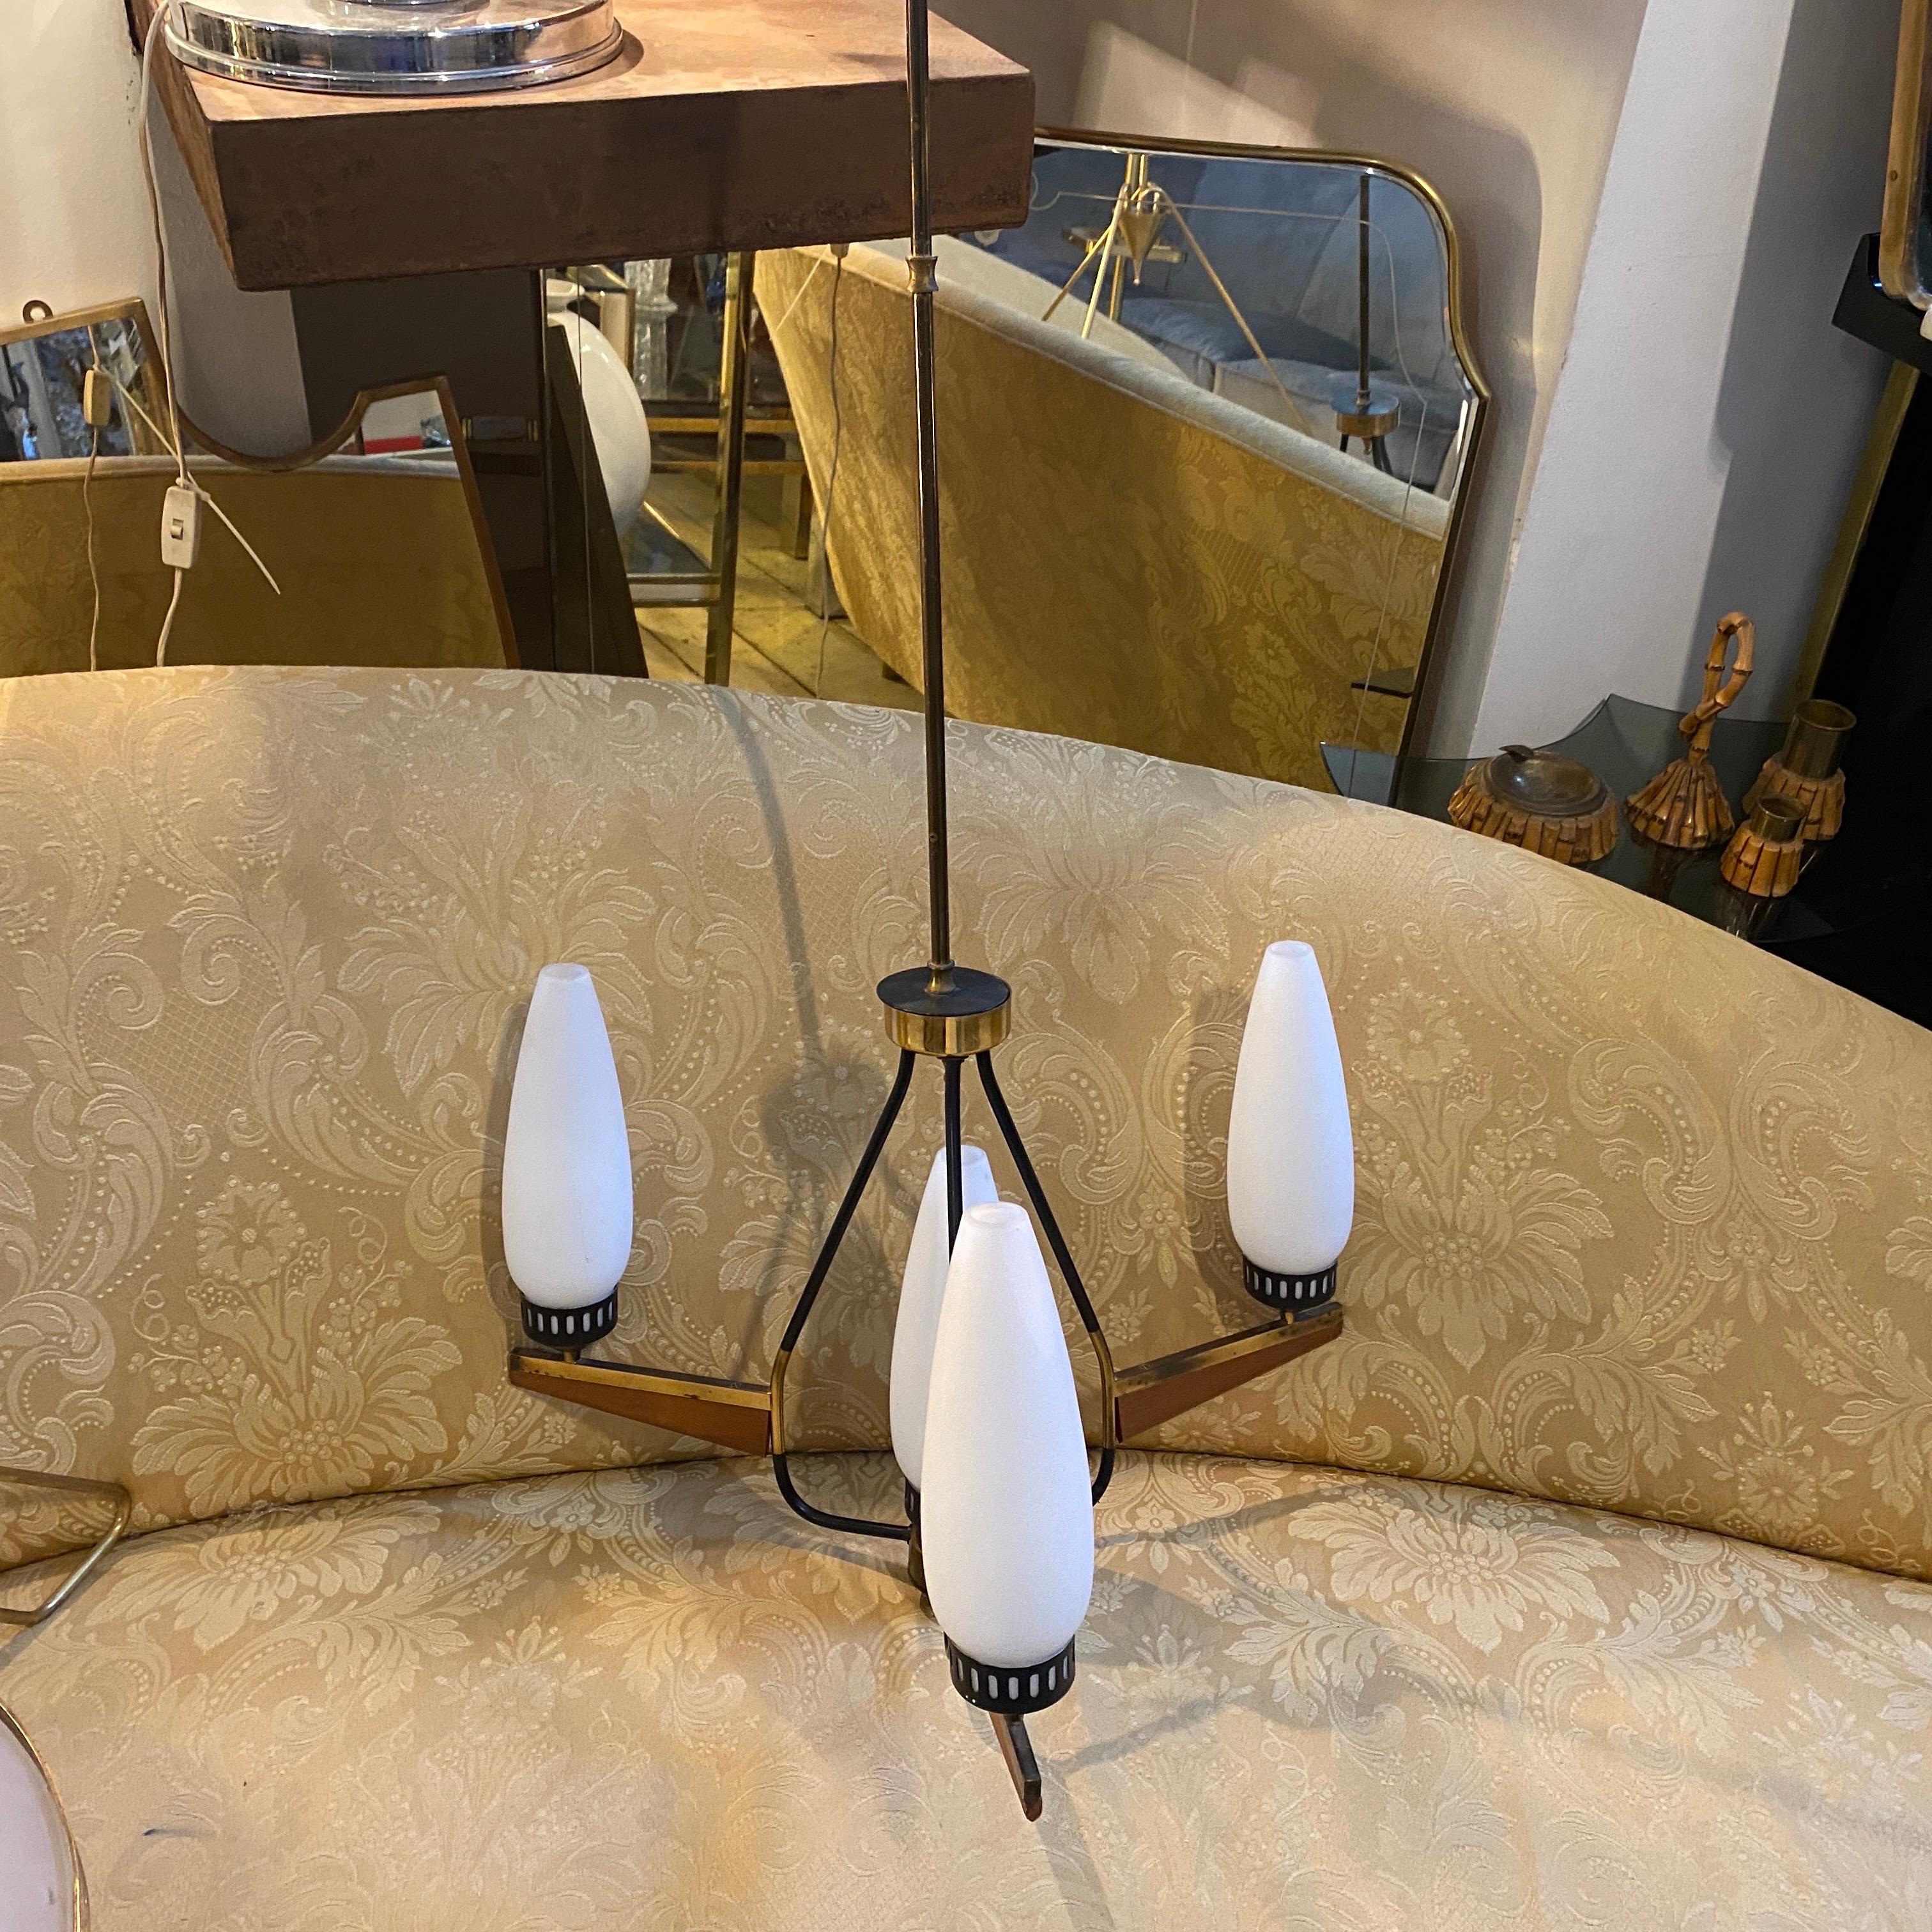 An elegant mid-century modern teak, brass and opaline glass four lights chandelier designed and manufactured in Italy in the Sixties. It's in lovely conditions, it works both 110-240 volts and needs regular e14 bulbs.
This mid-century modern